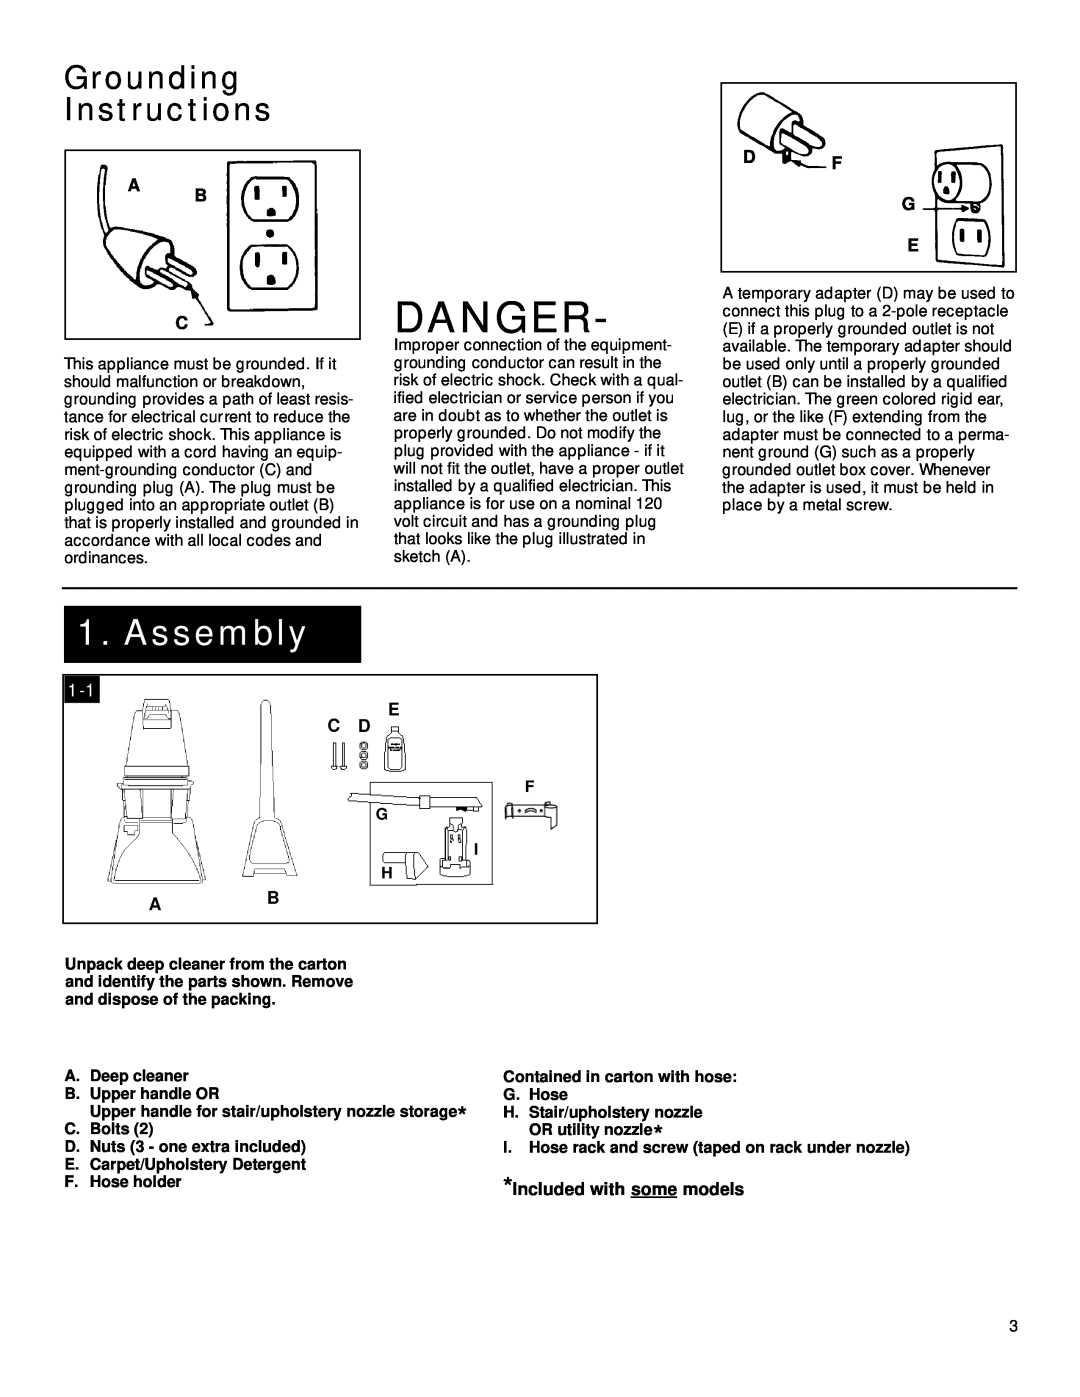 Hoover Plus owner manual Danger, Grounding Instructions, A B C, Df G E, E C D, Included with some models, Assembly 